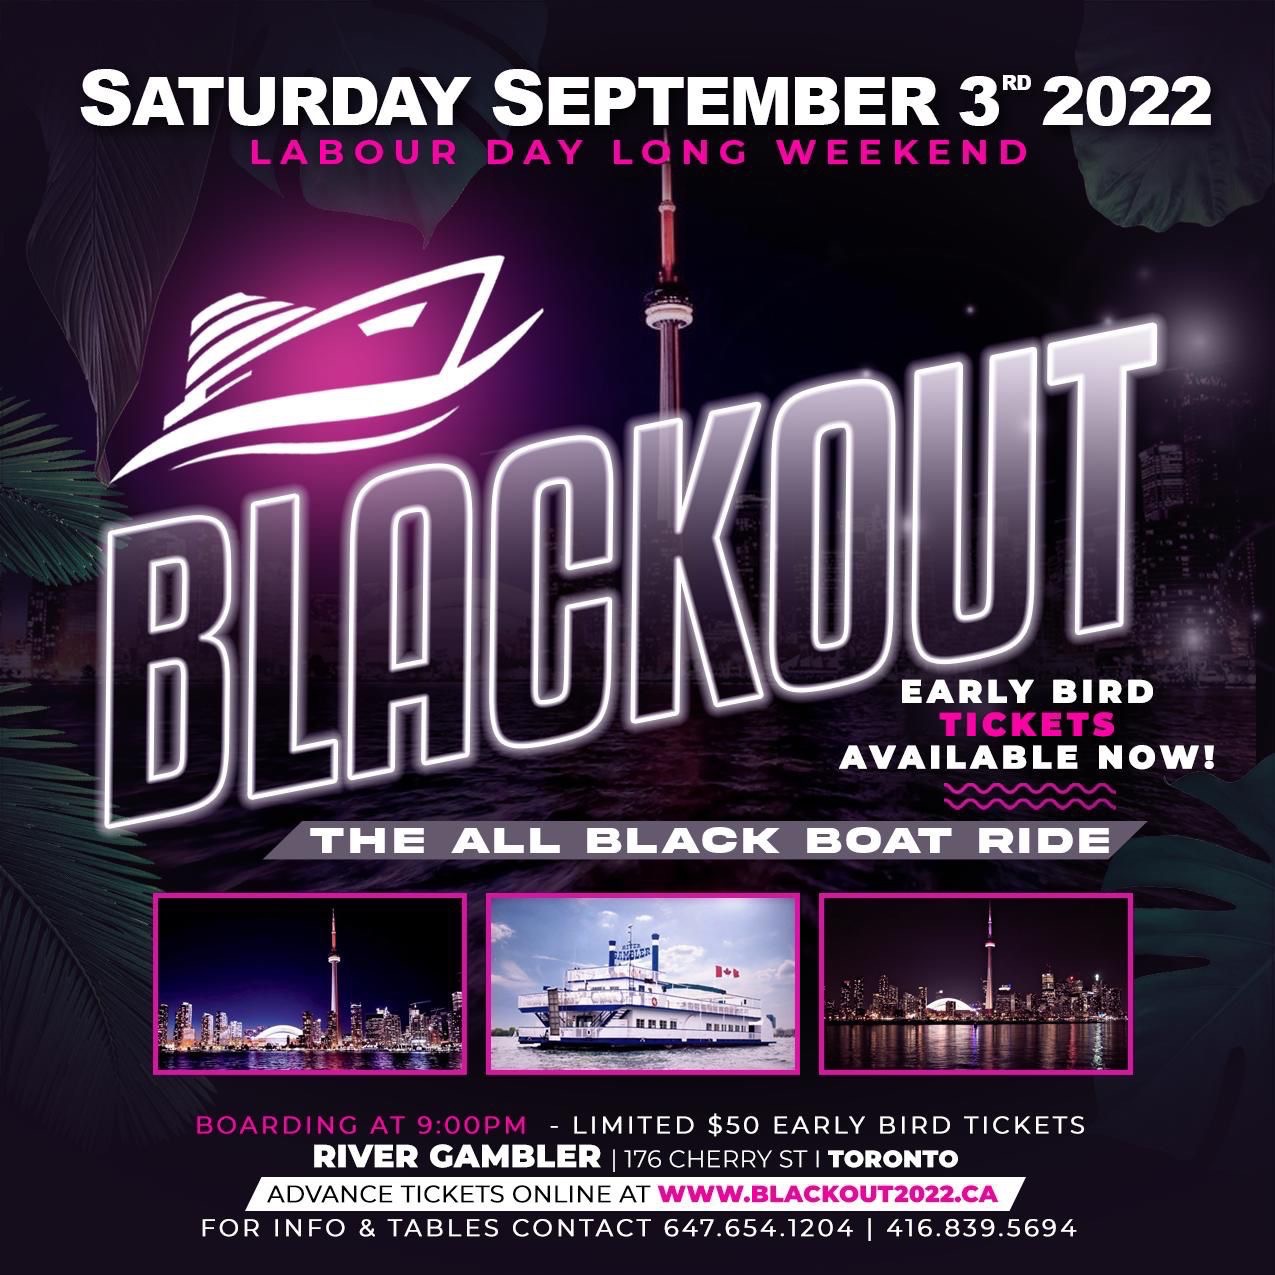 BLACK OUT BOAT RIDE 